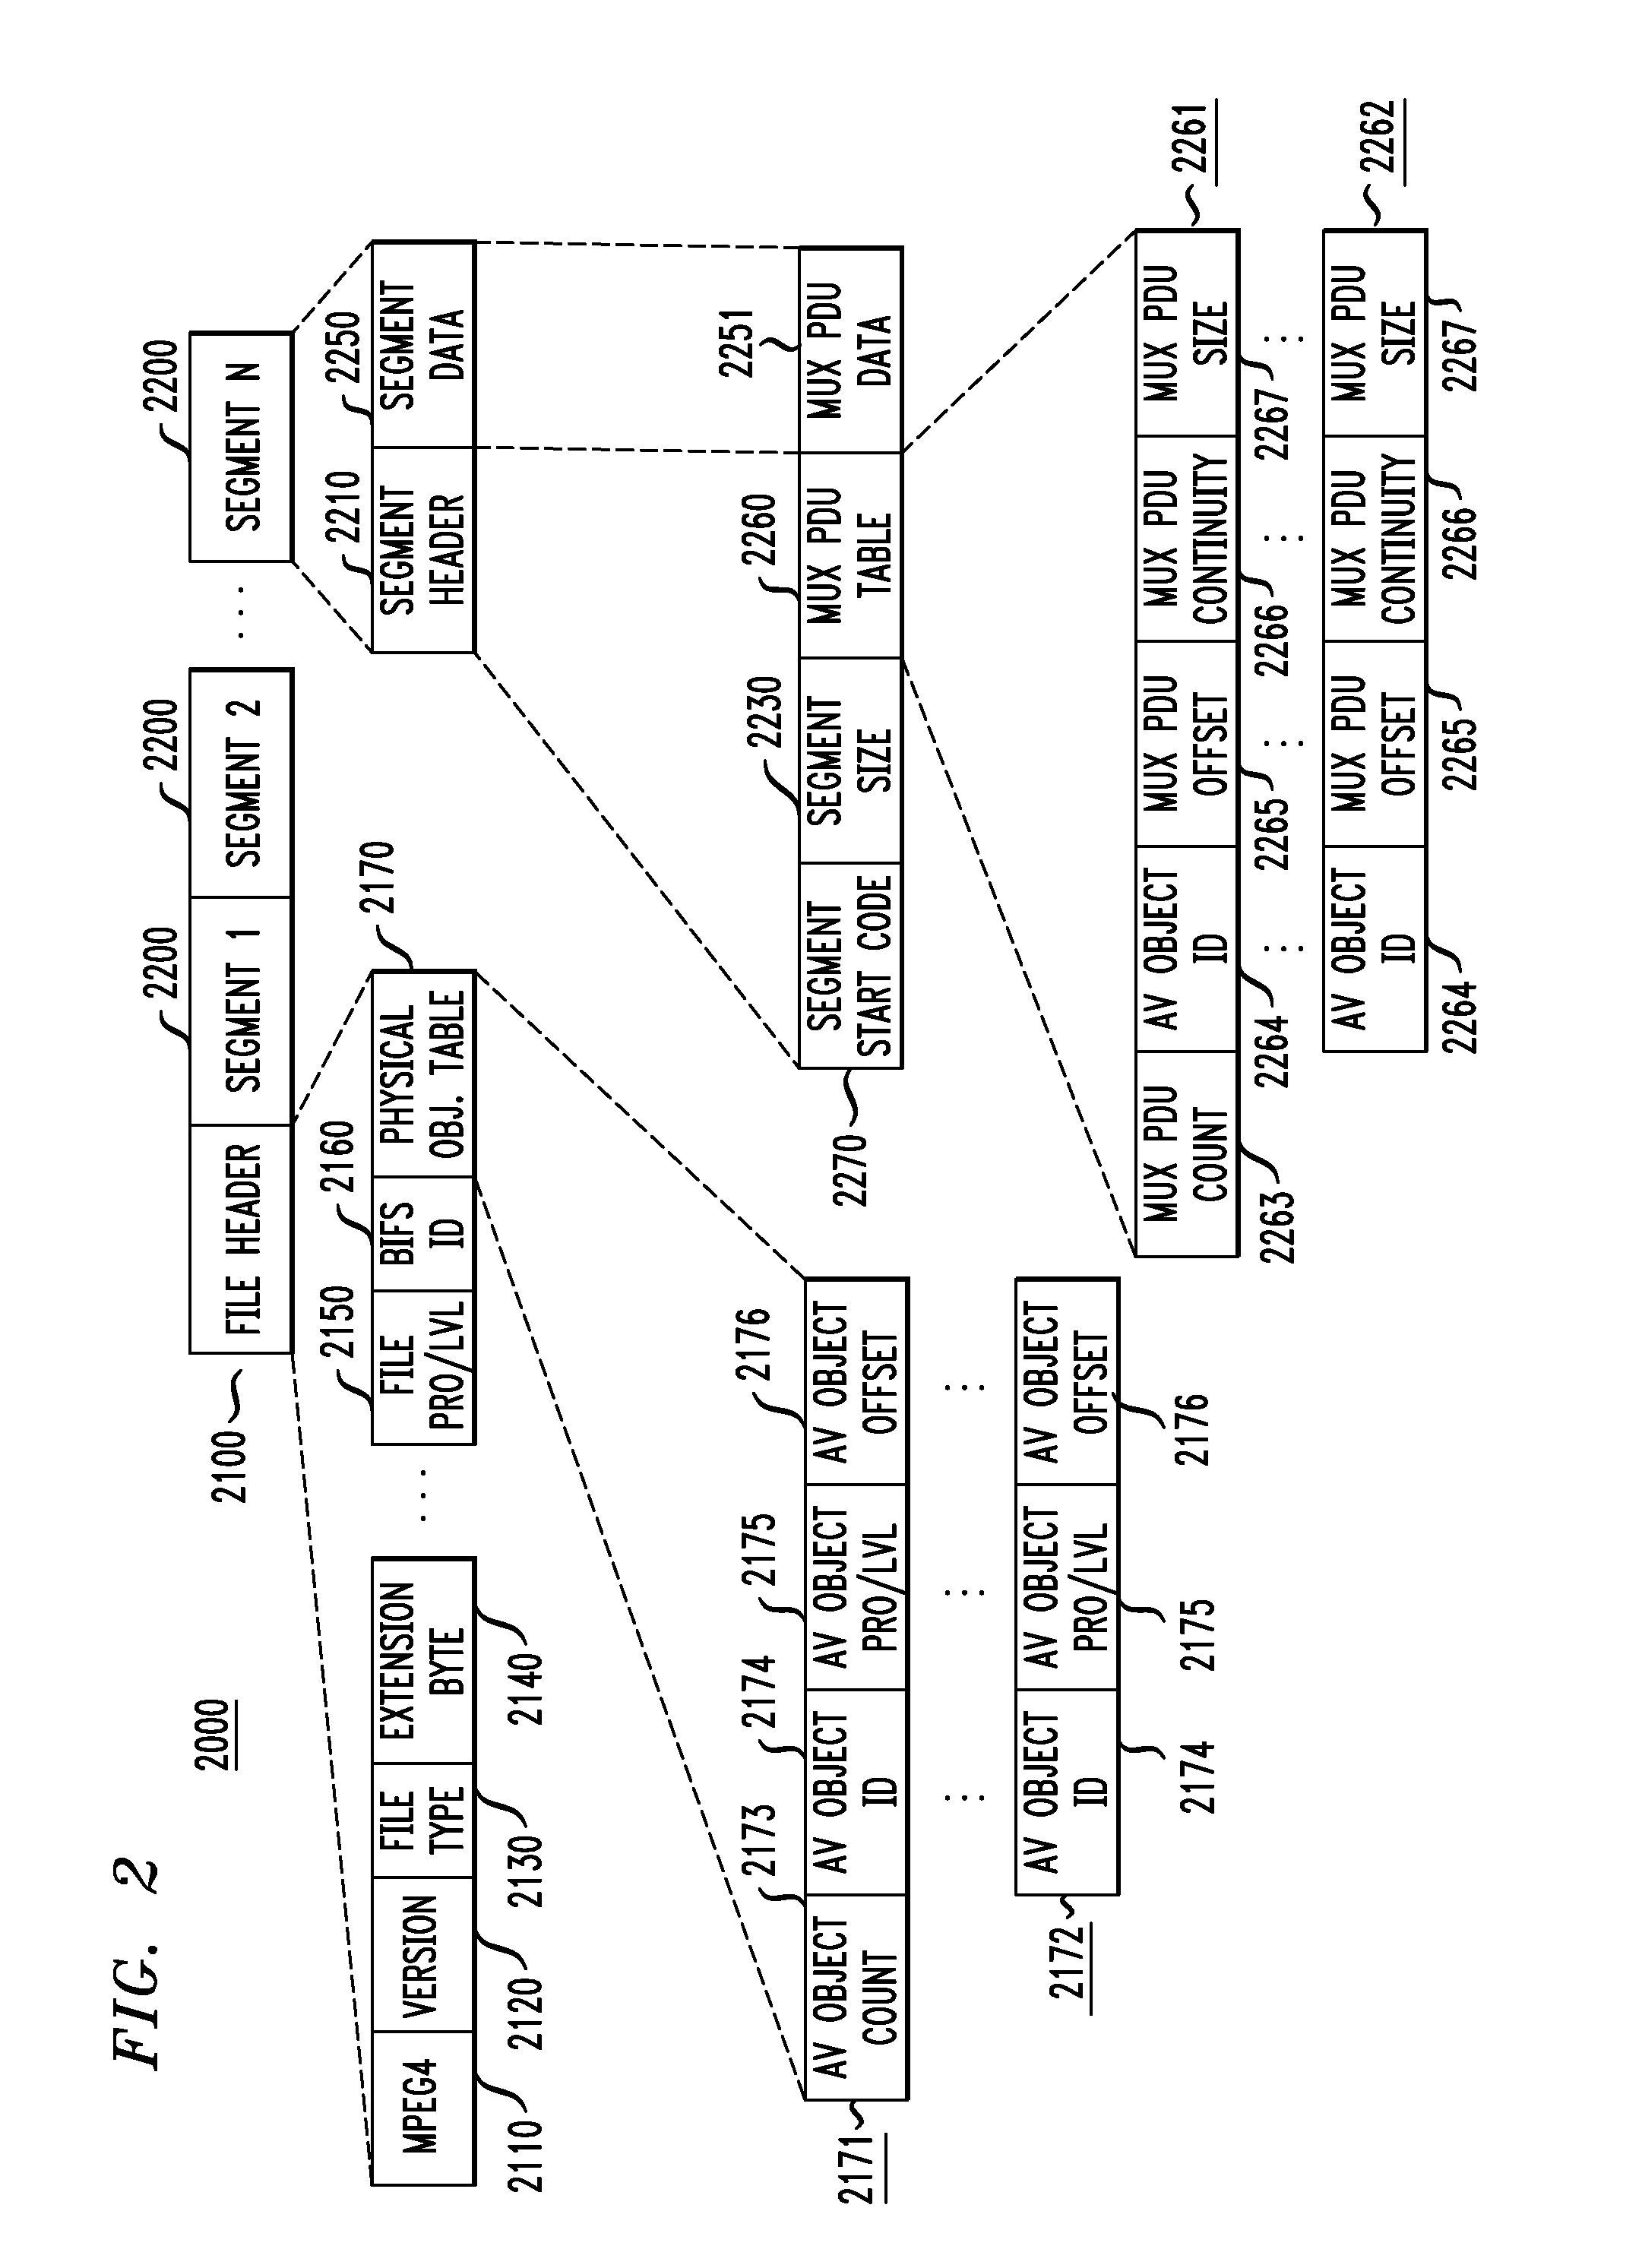 System and method of organizing data to facilitate access and streaming